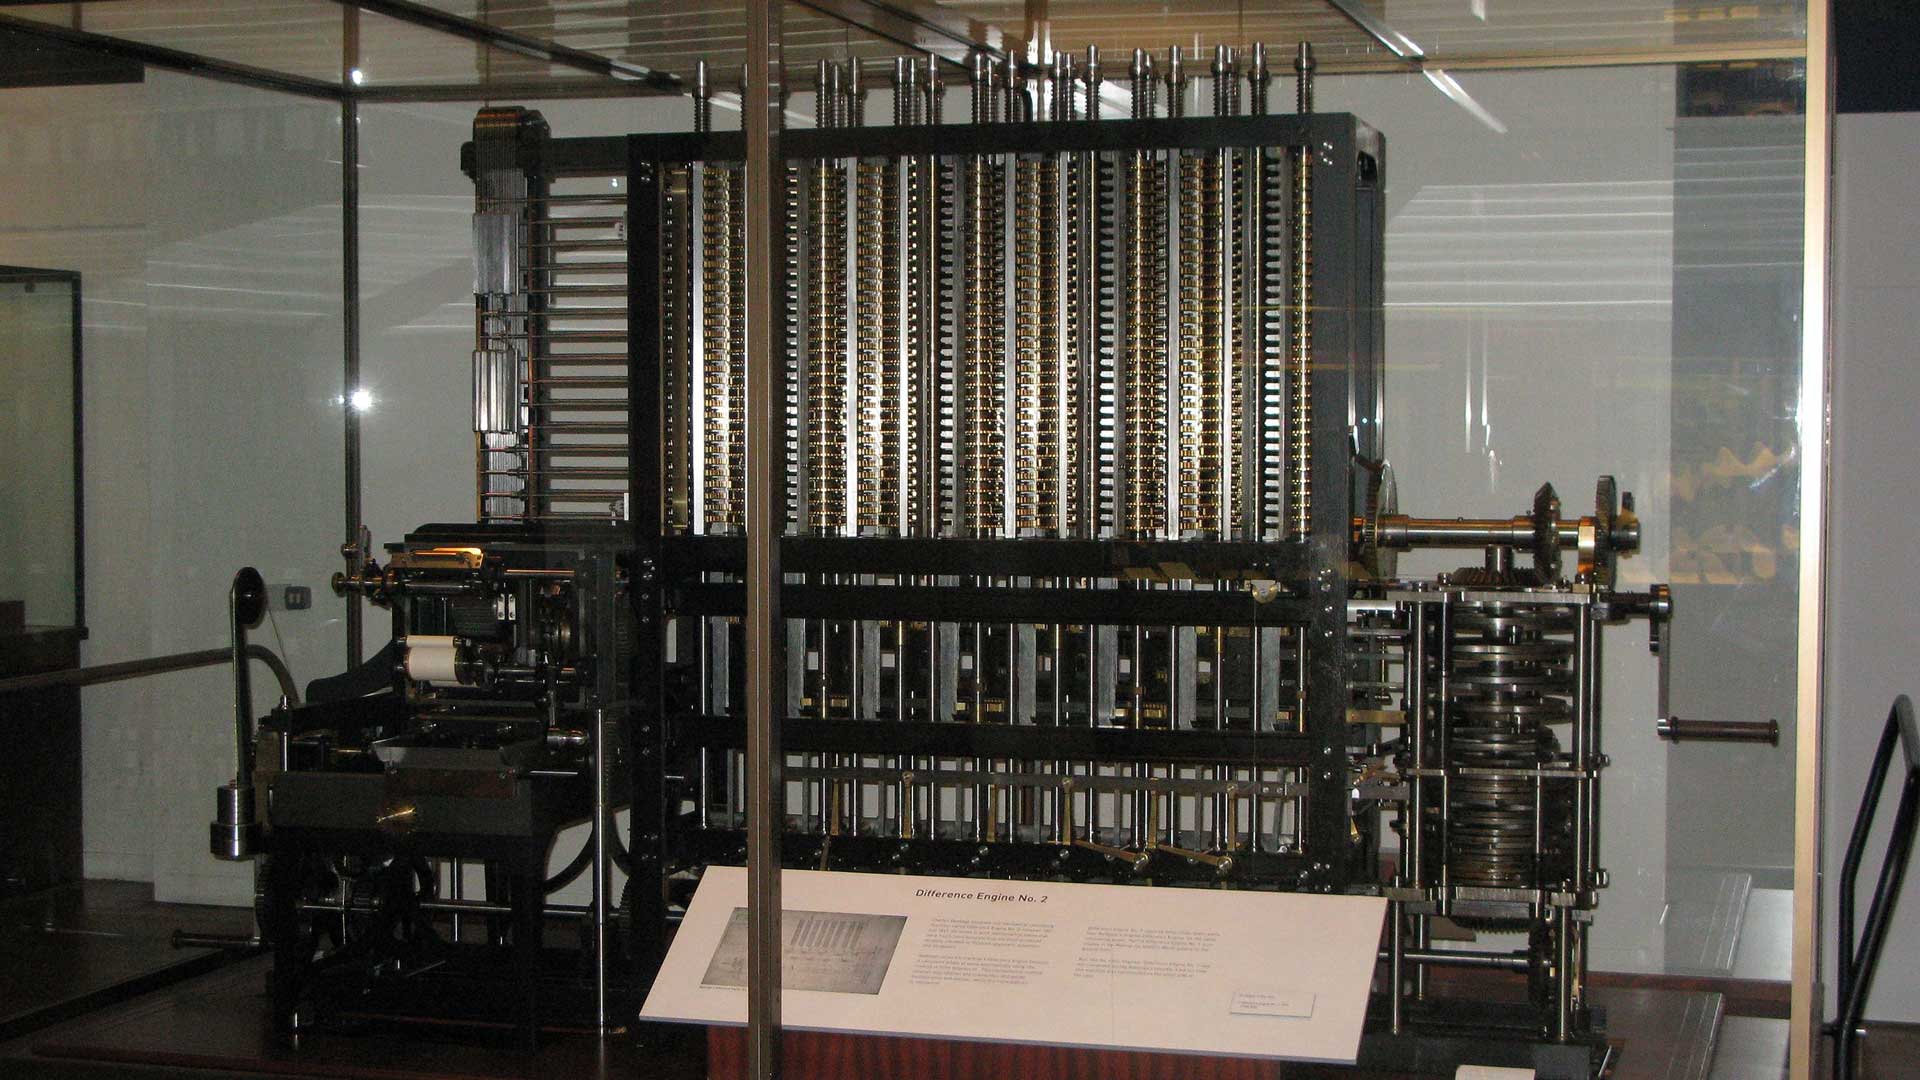 Difference Engine constructed based on plans by Charles Babbage